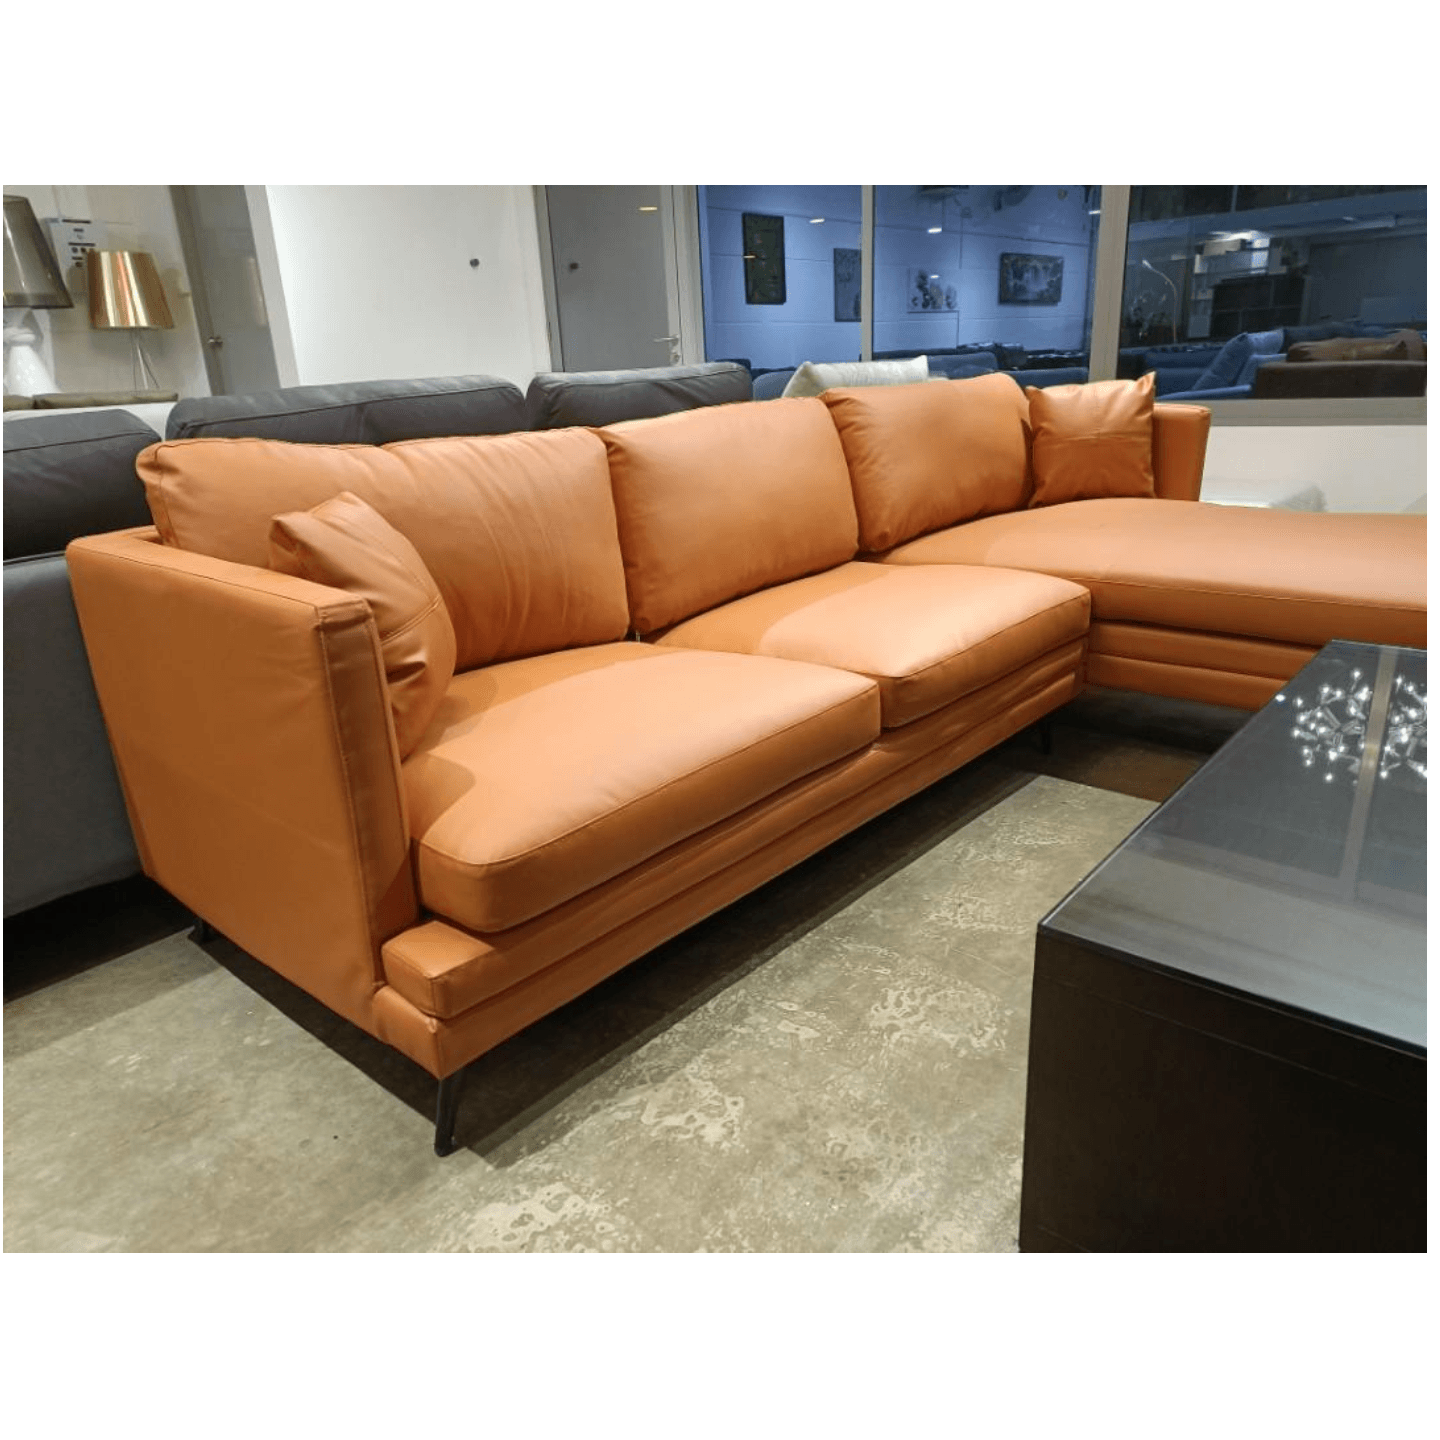 SPECARA L-Shaped Sofa in CAMEL BROWN Leatherette